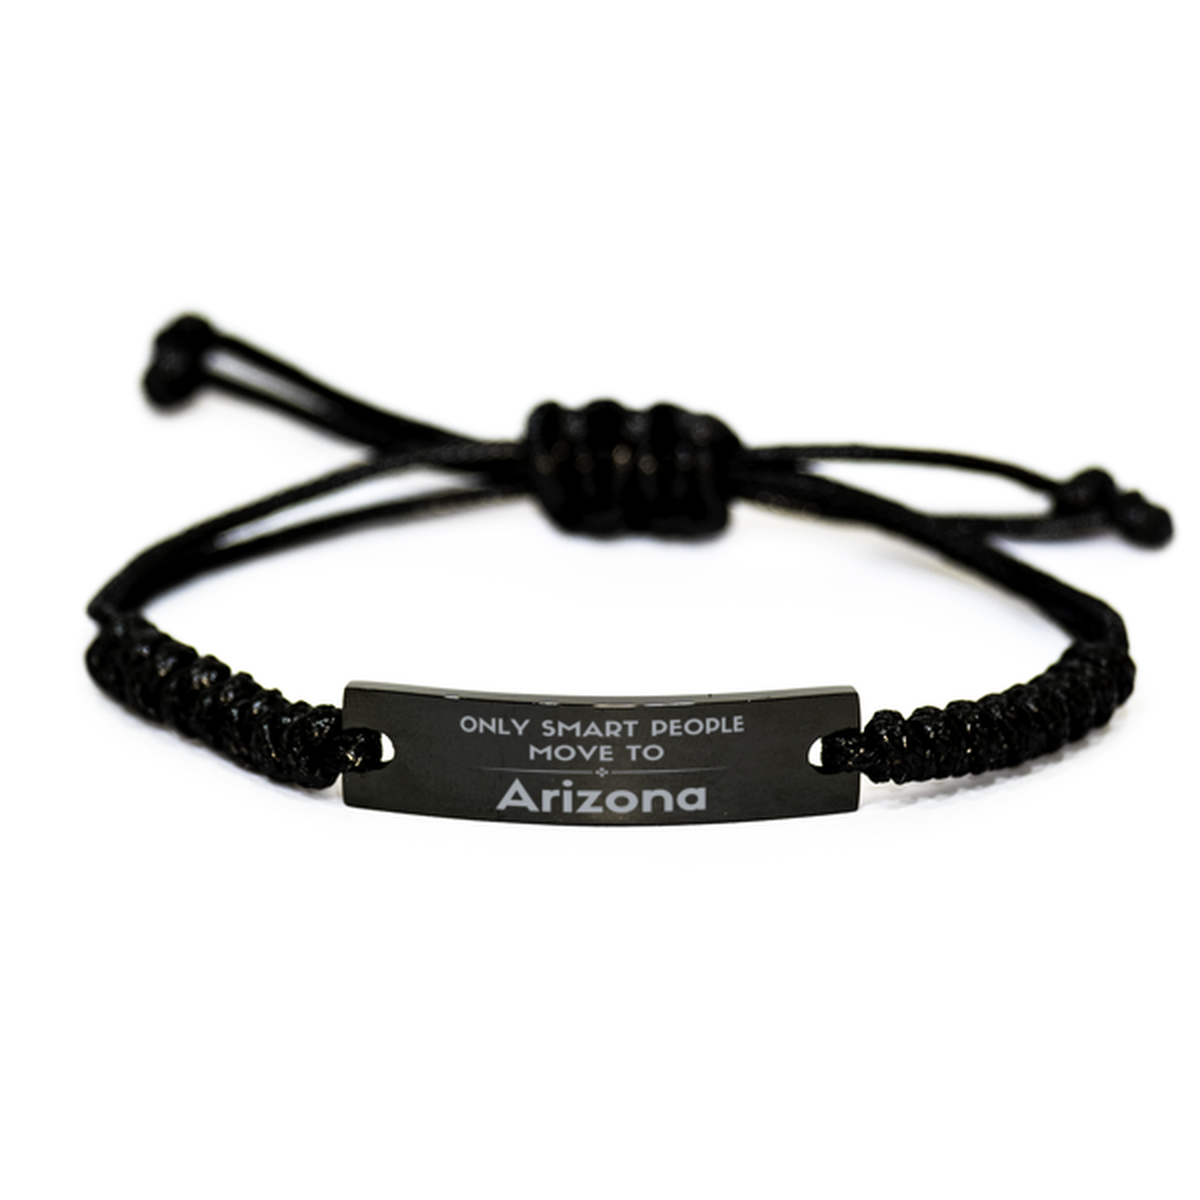 Only smart people move to Arizona Black Rope Bracelet, Gag Gifts For Arizona, Move to Arizona Gifts for Friends Coworker Funny Saying Quote